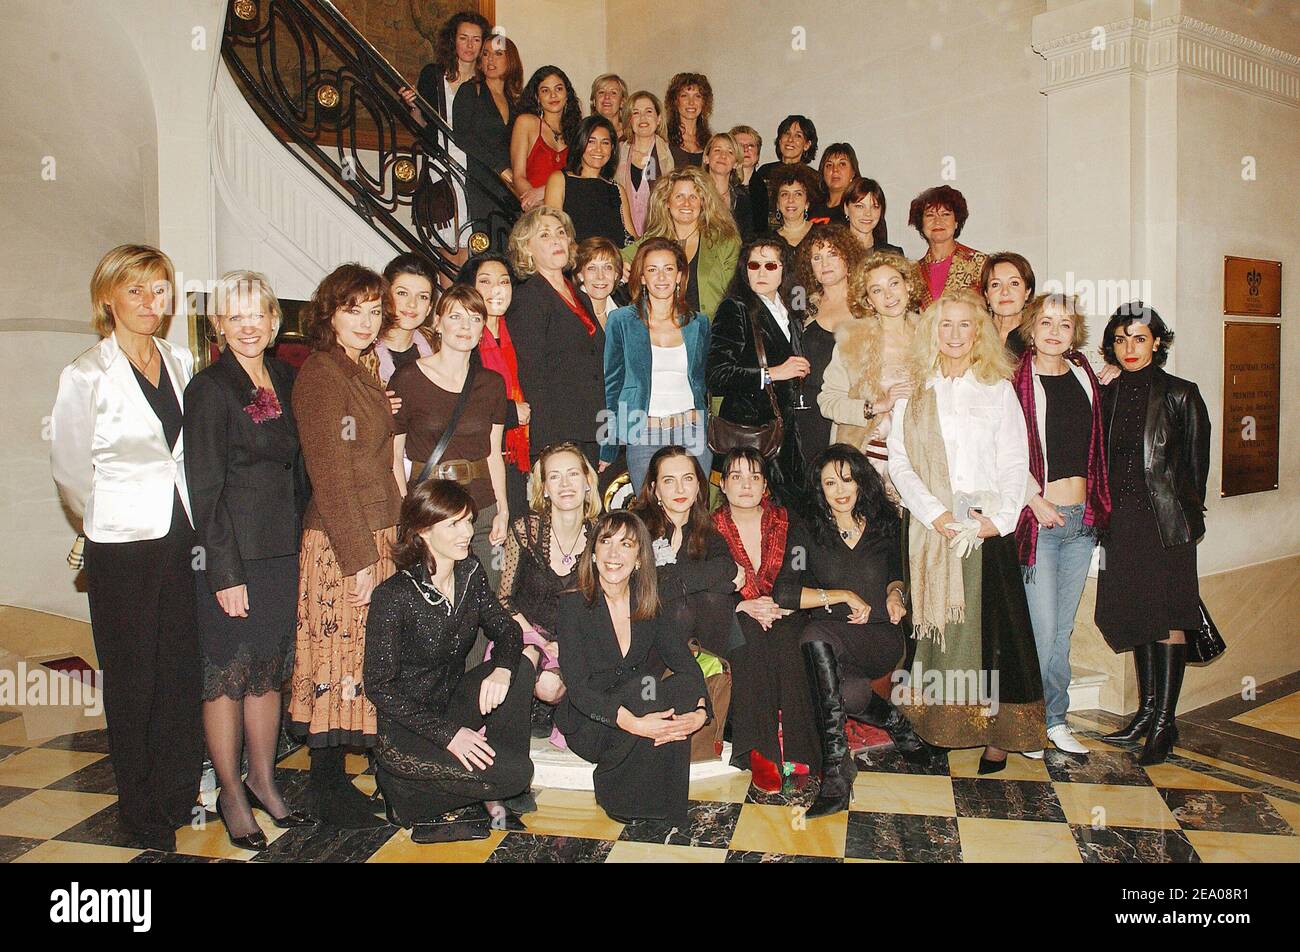 Famous French women gathered at the Hotel de Crillon in Paris, France, on March 7, 2005, to attend the Women's Day Party on the occasion of the International Women's Day to be observed on March 8. Photo by Giancarlo Gorassini/ABACA. Stock Photo